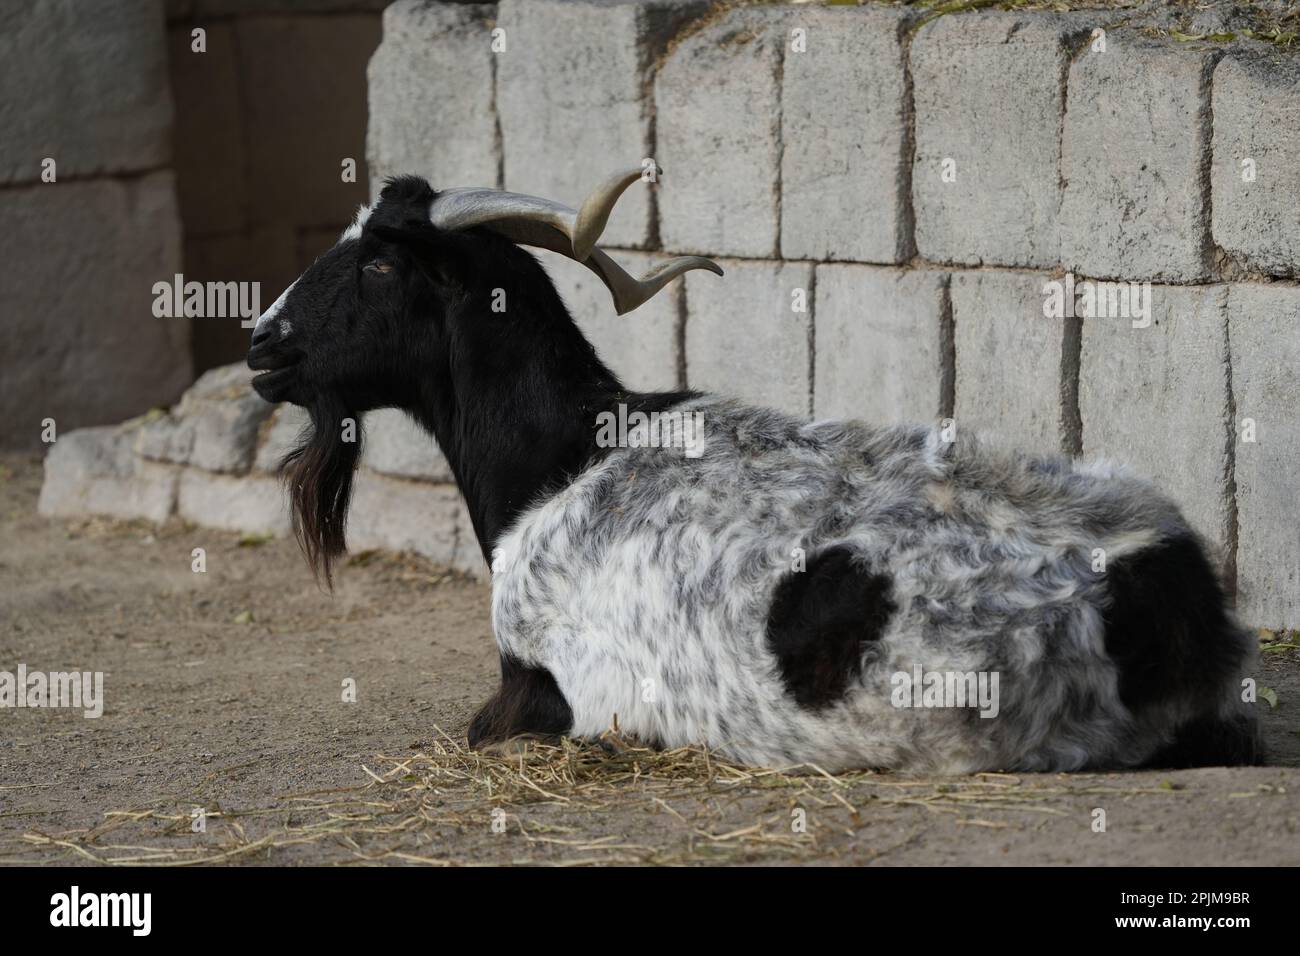 A white and black Fainting goat resting on the ground in front of a brick wall Stock Photo